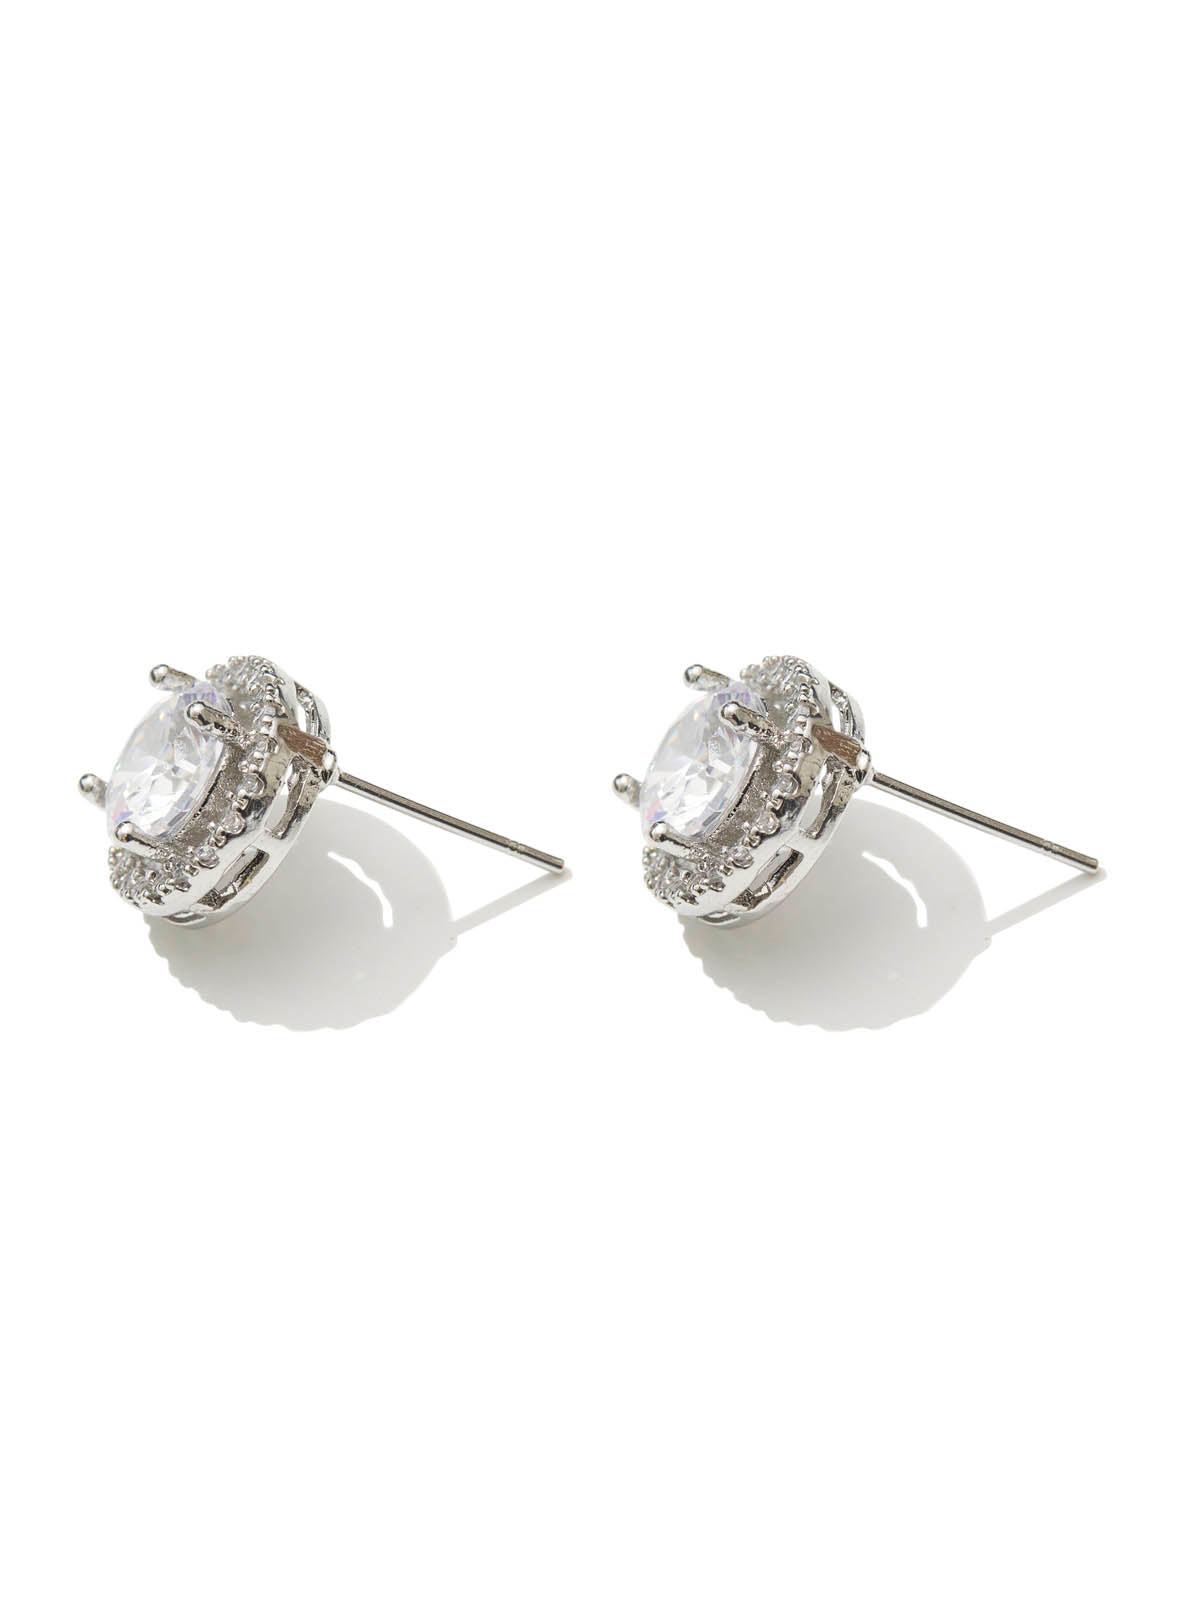 Rina Silver Earrings by Montique